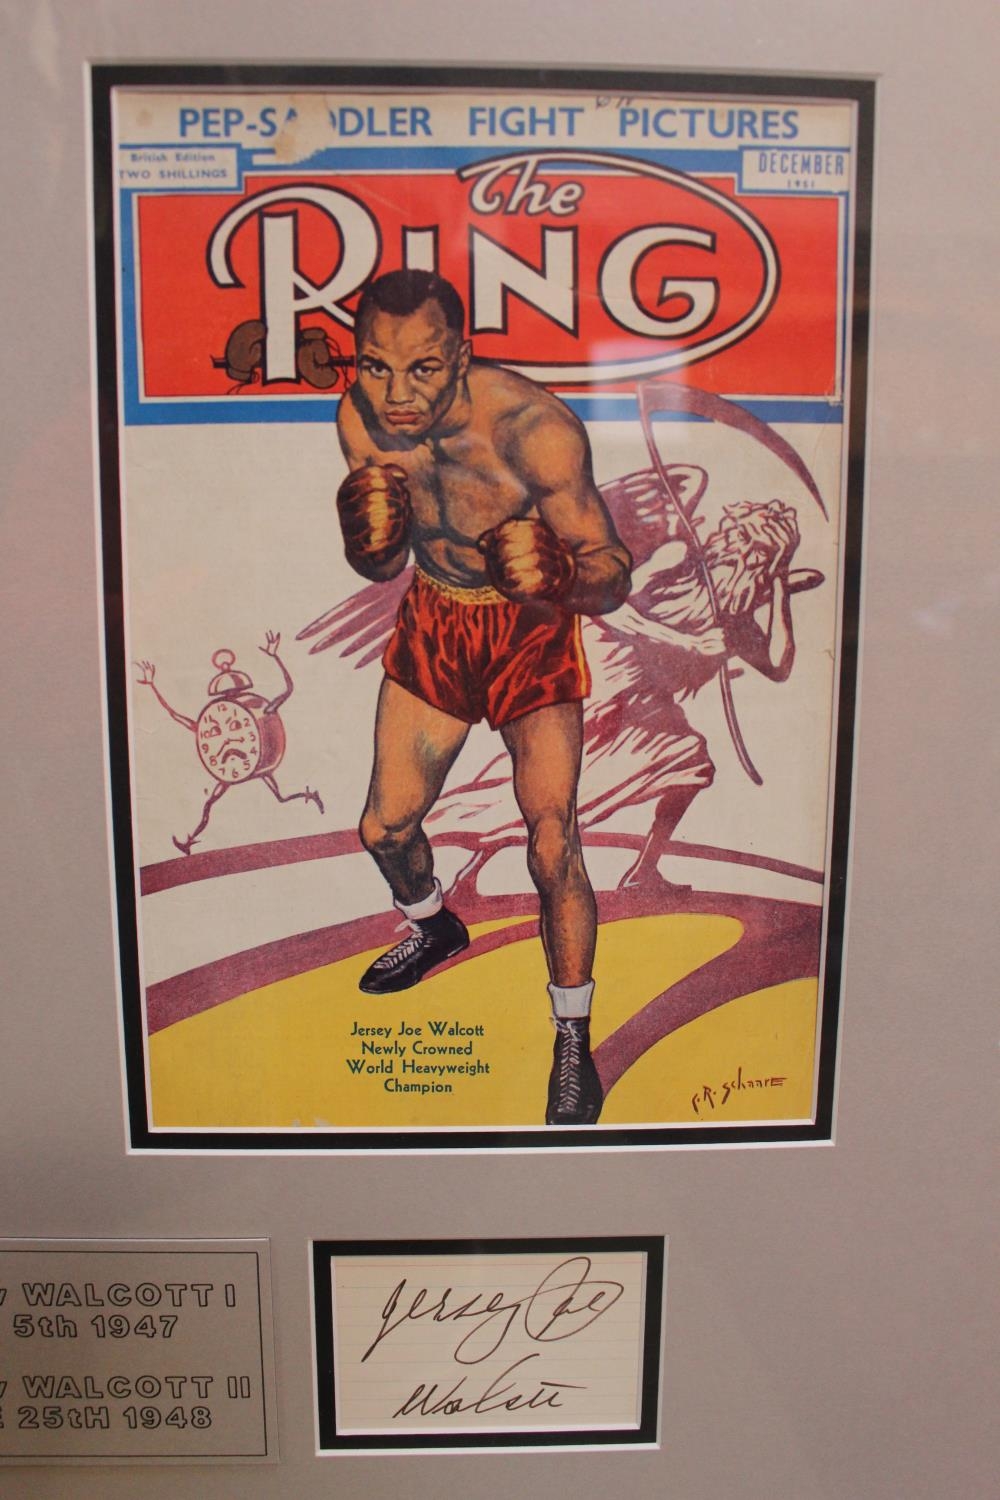 Framed Joe Louis and Jersey Joe Walcott authentic cut signatures. 2 x original ring magazines and - Image 3 of 6